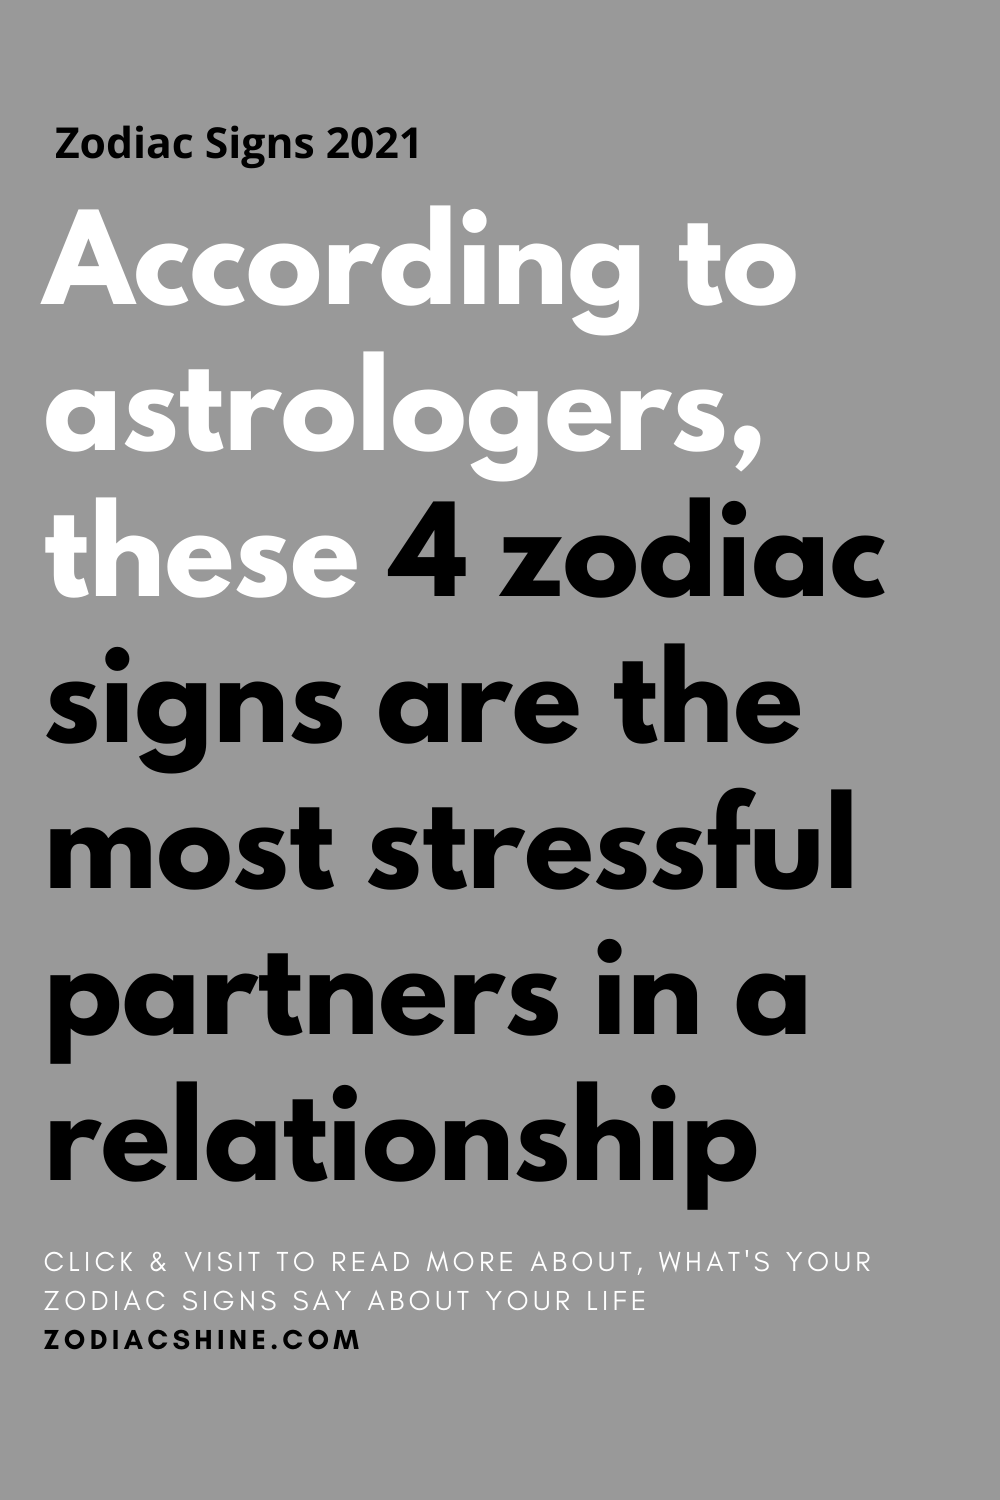 According to astrologers, these 4 zodiac signs are the most stressful partners in a relationship